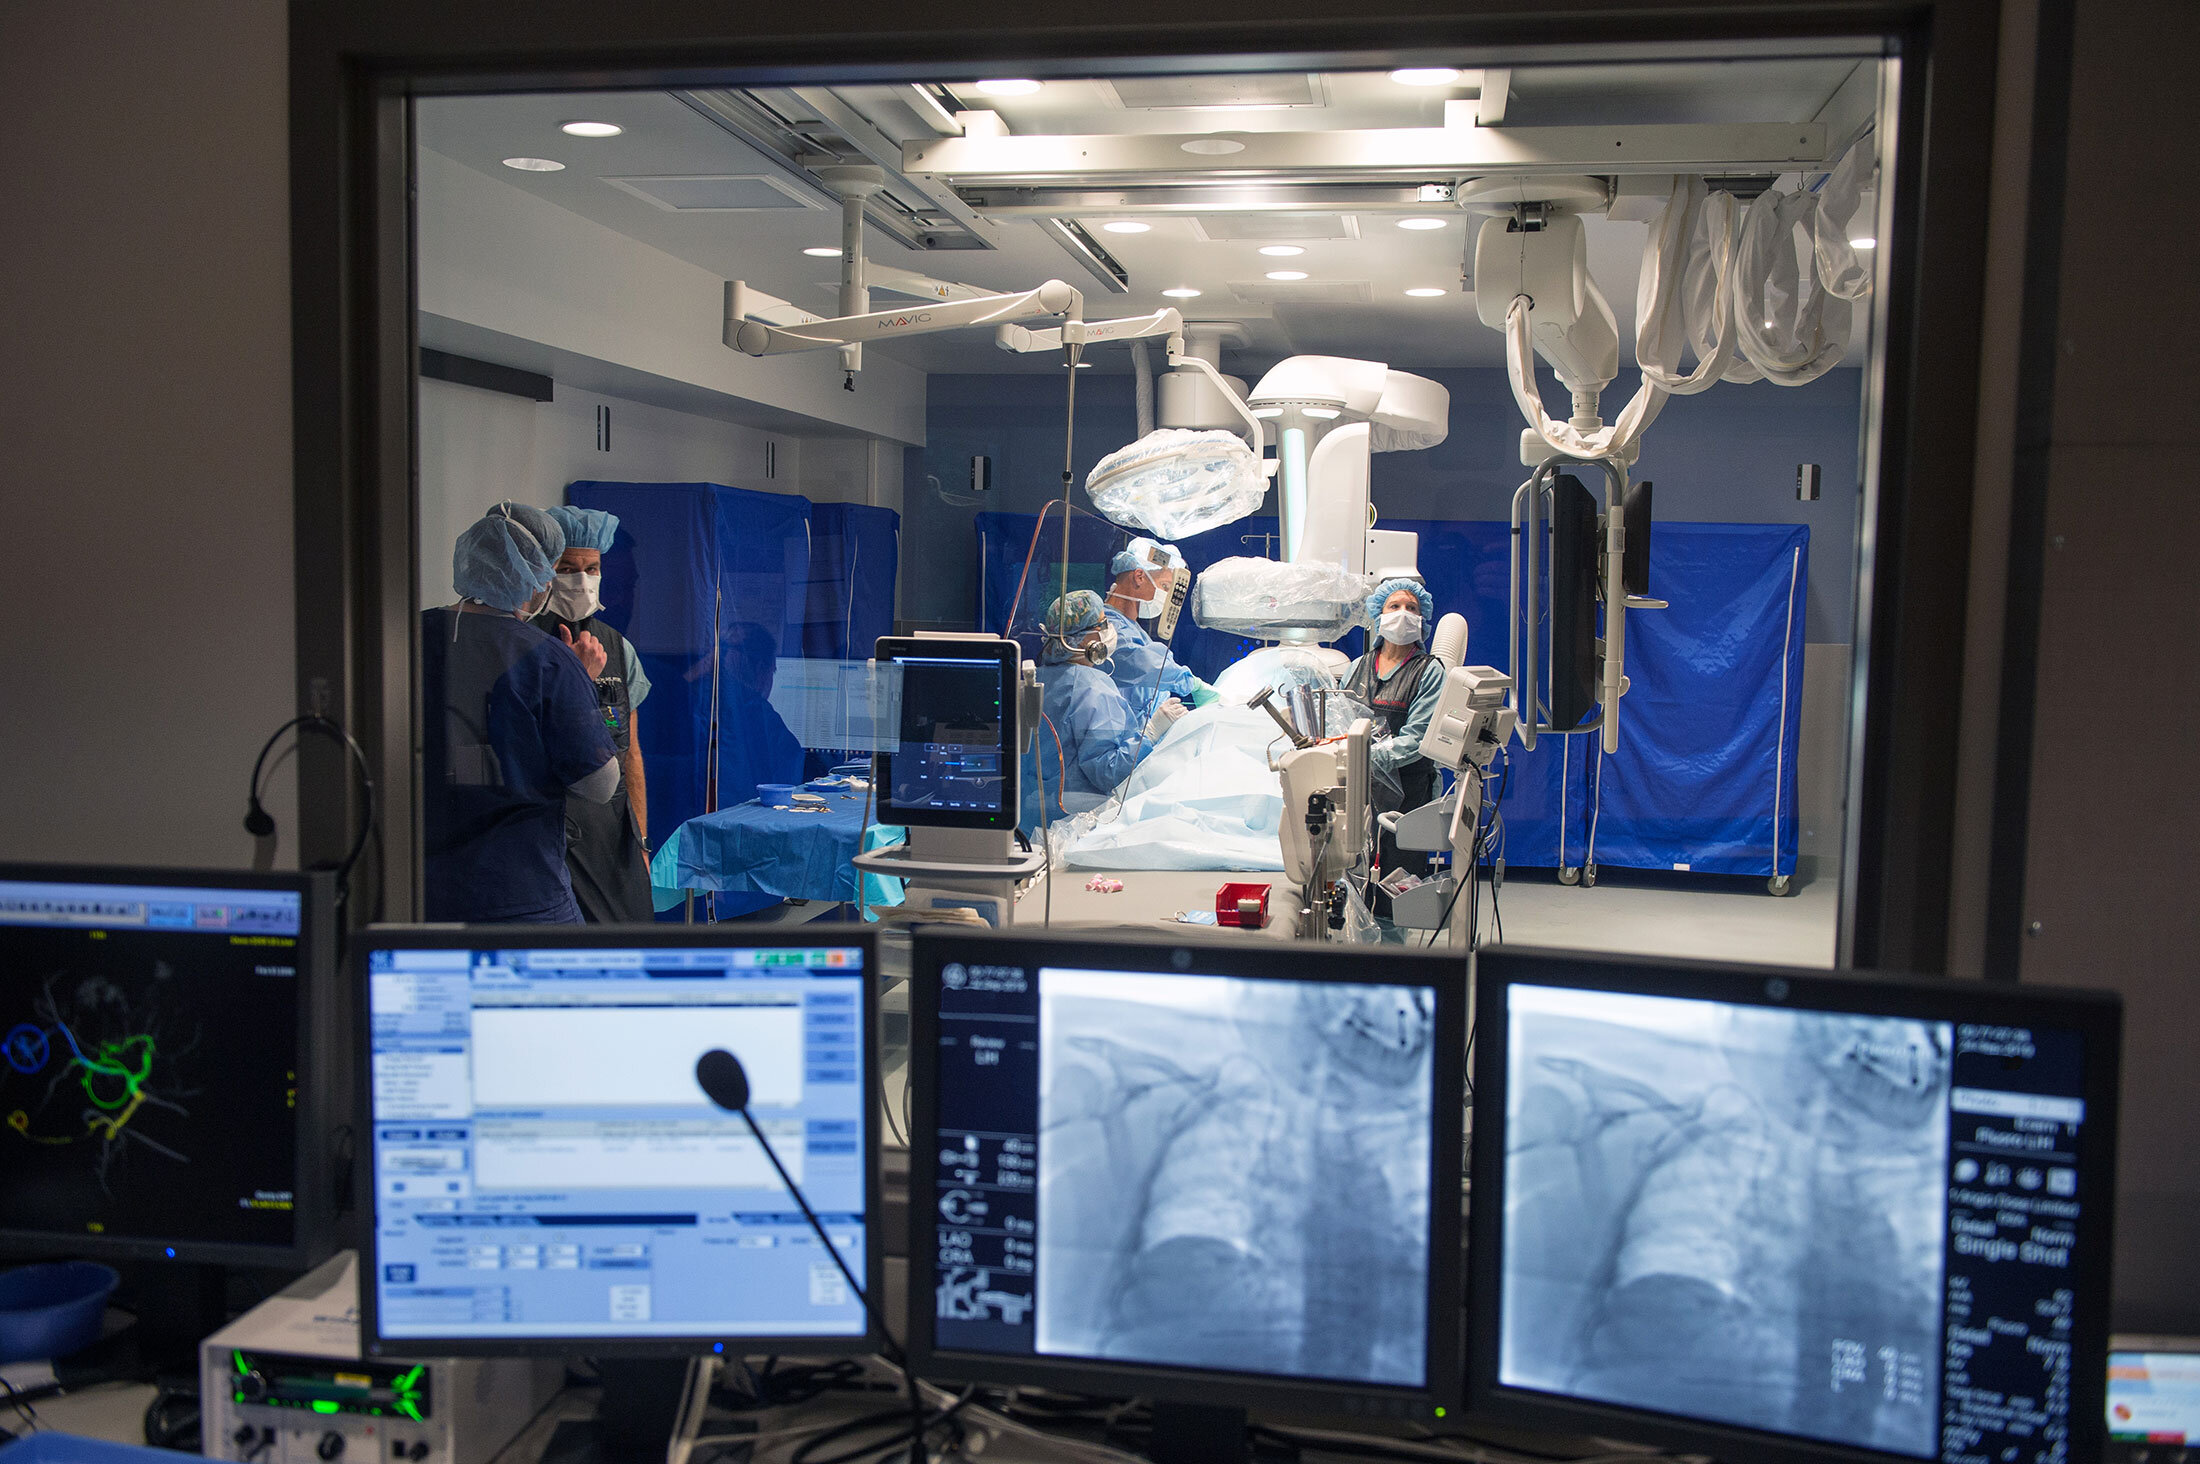 OUR OUTPATIENT BASED INTERVENTIONAL CENTER